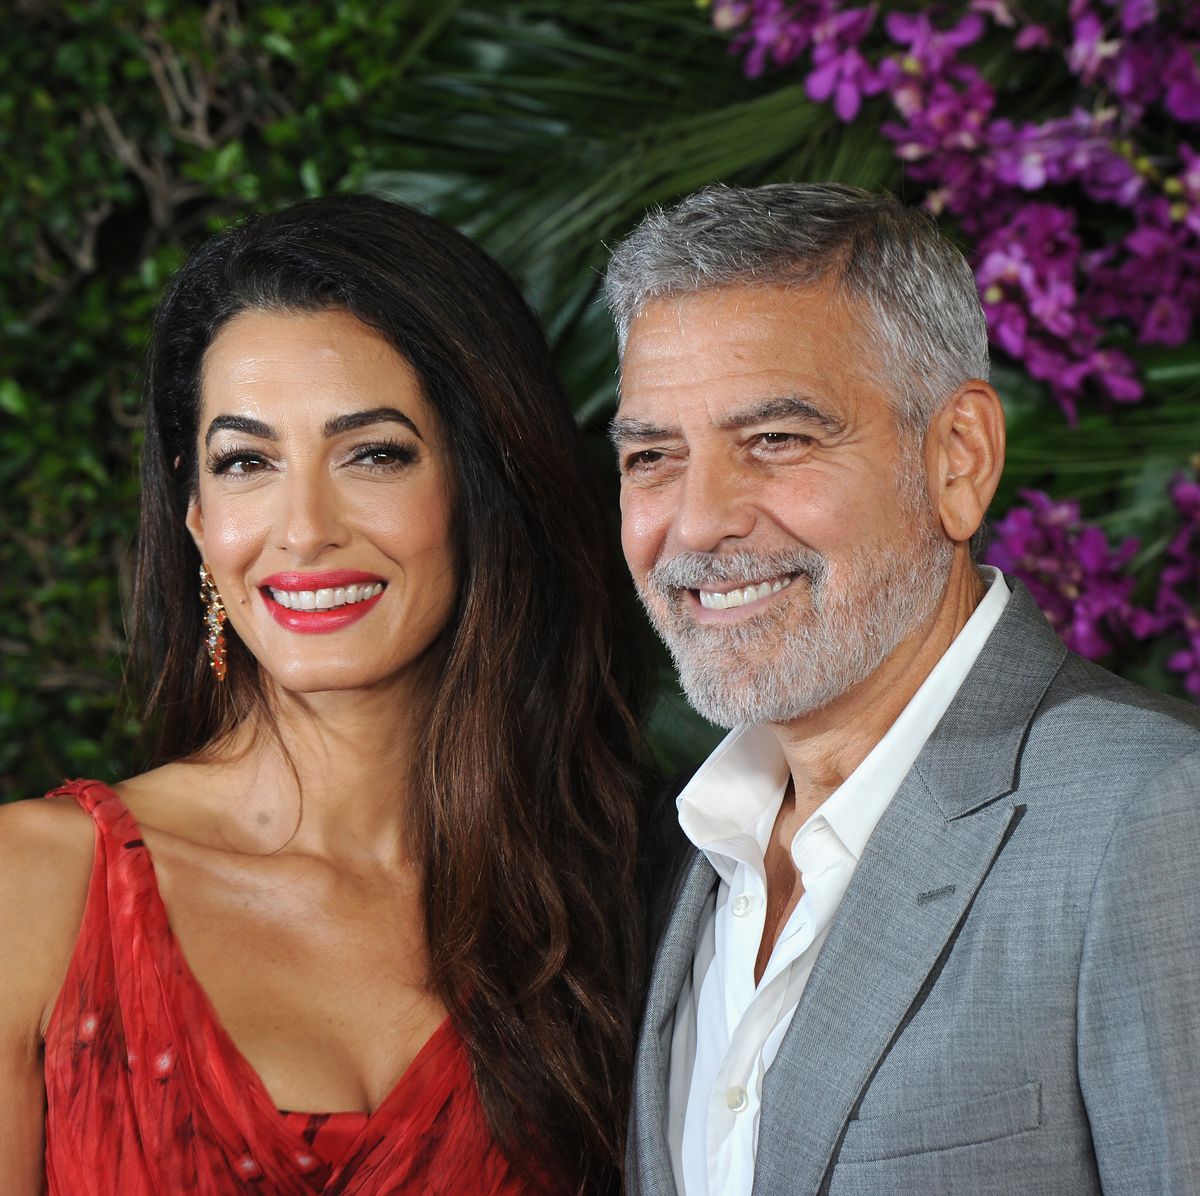 los angeles, ca   october 17  george clooney and his wife amal clooney attend the premiere of universal pictures ticket to paradise held at regency village theatre on october 17, 2022 in los angeles, california  photo by albert l ortegagetty images